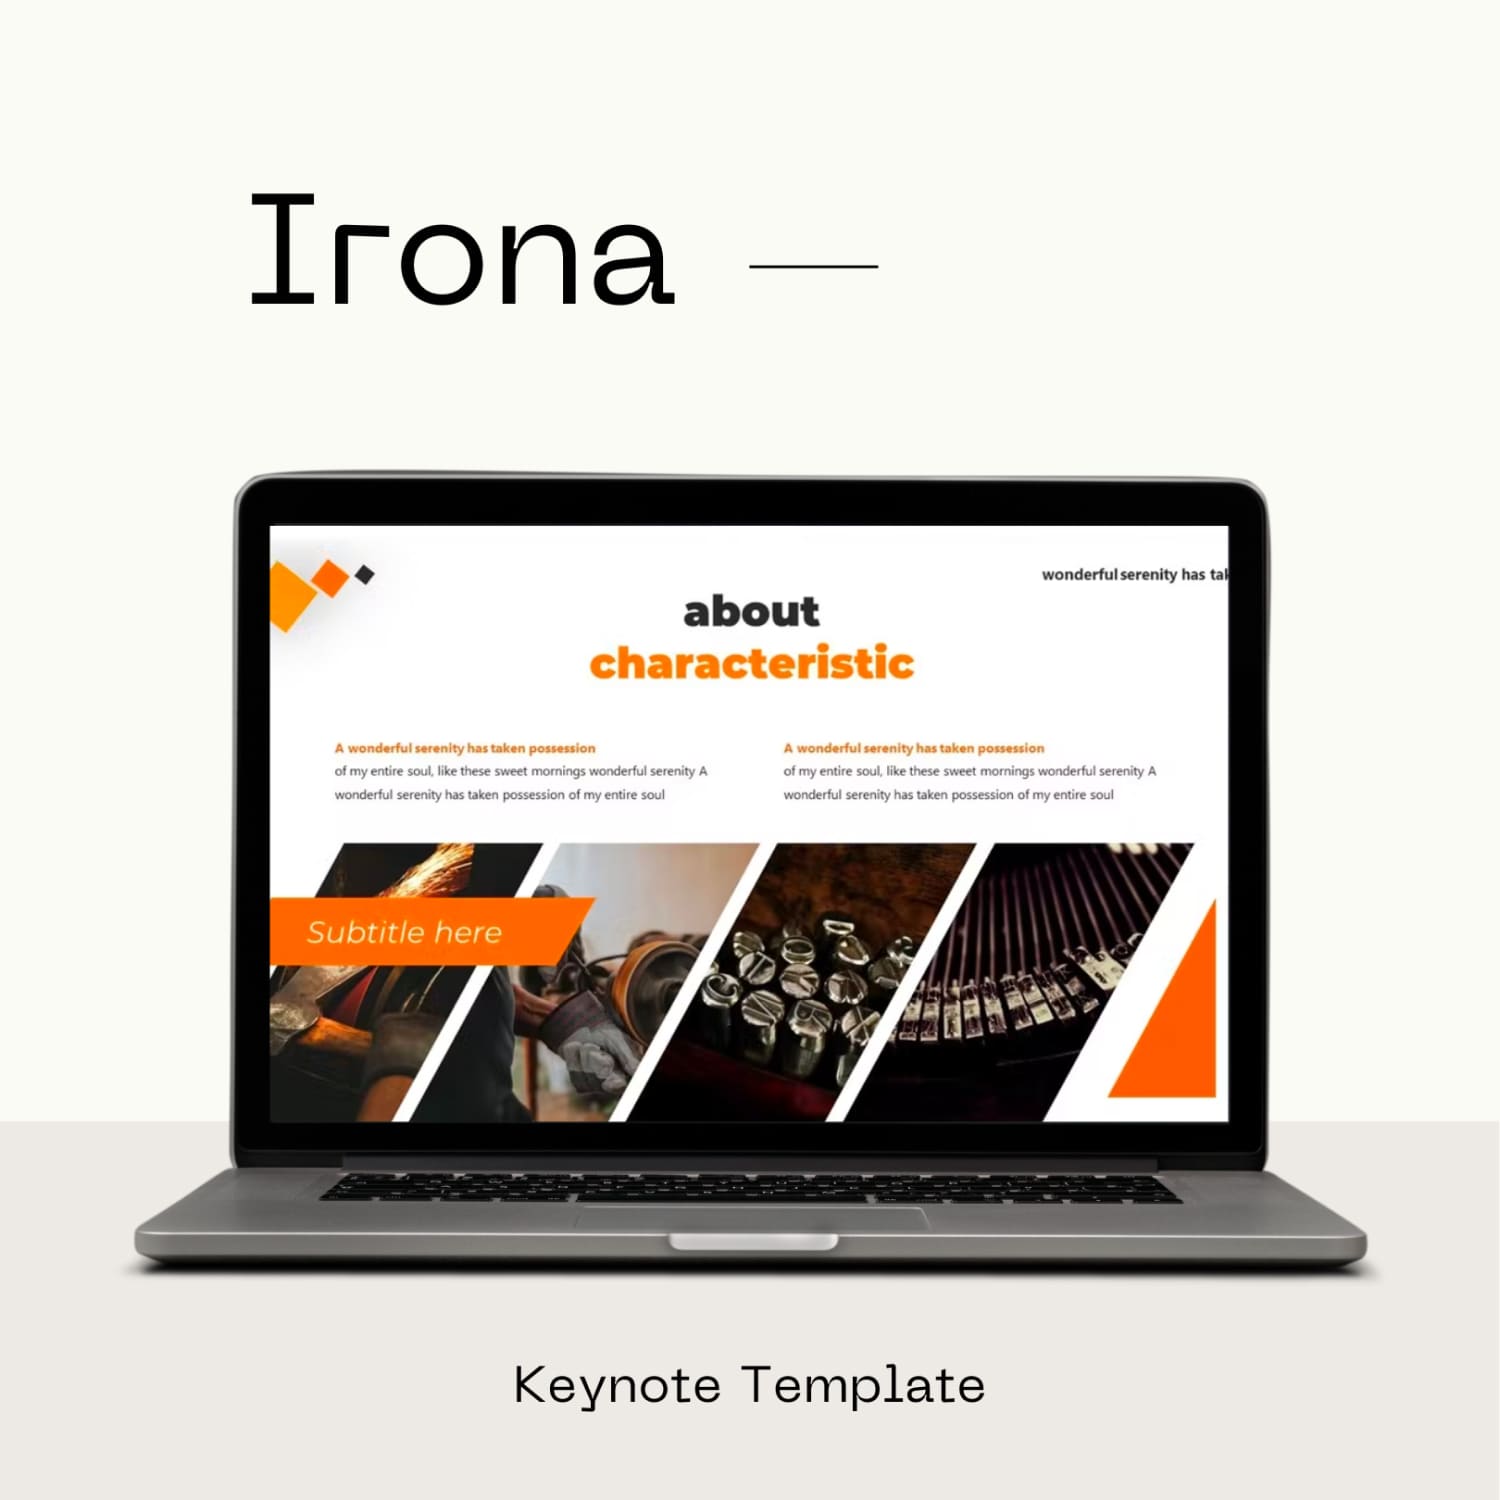 Irona Keynote Template on your Laptop.